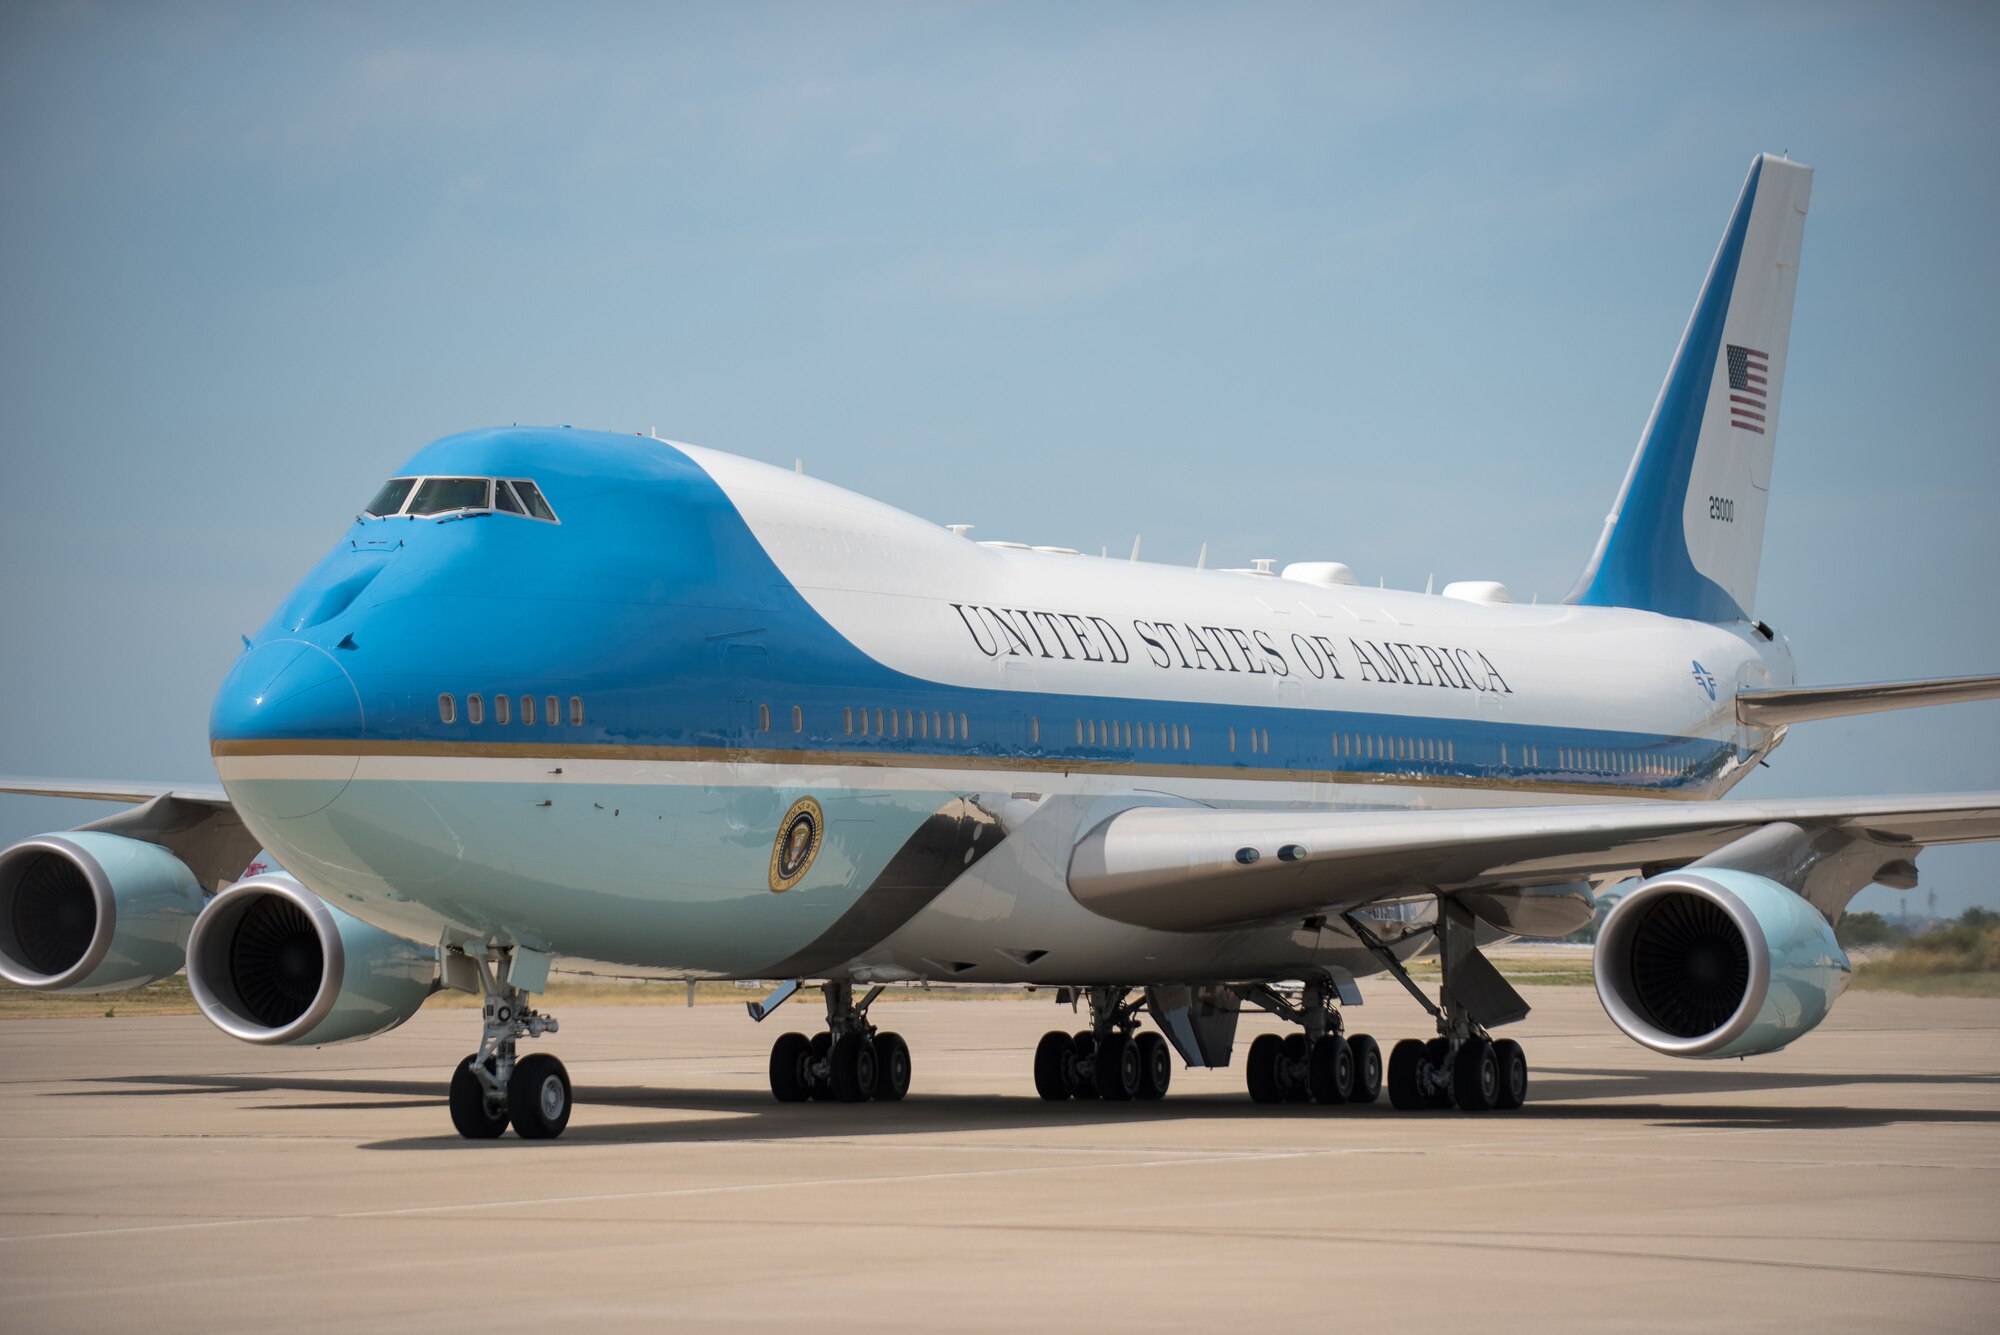 President Donald Trump arrives at the Kentucky Air National Guard Base in Louisville, Ky., aboard Air Force One on Aug. 21, 2019. Trump was in town to speak at an AMVETS convention and attend a fundraiser for Kentucky Gov. Matt Bevin’s re-election campaign. (U.S. Air National Guard photo by Dale Greer)